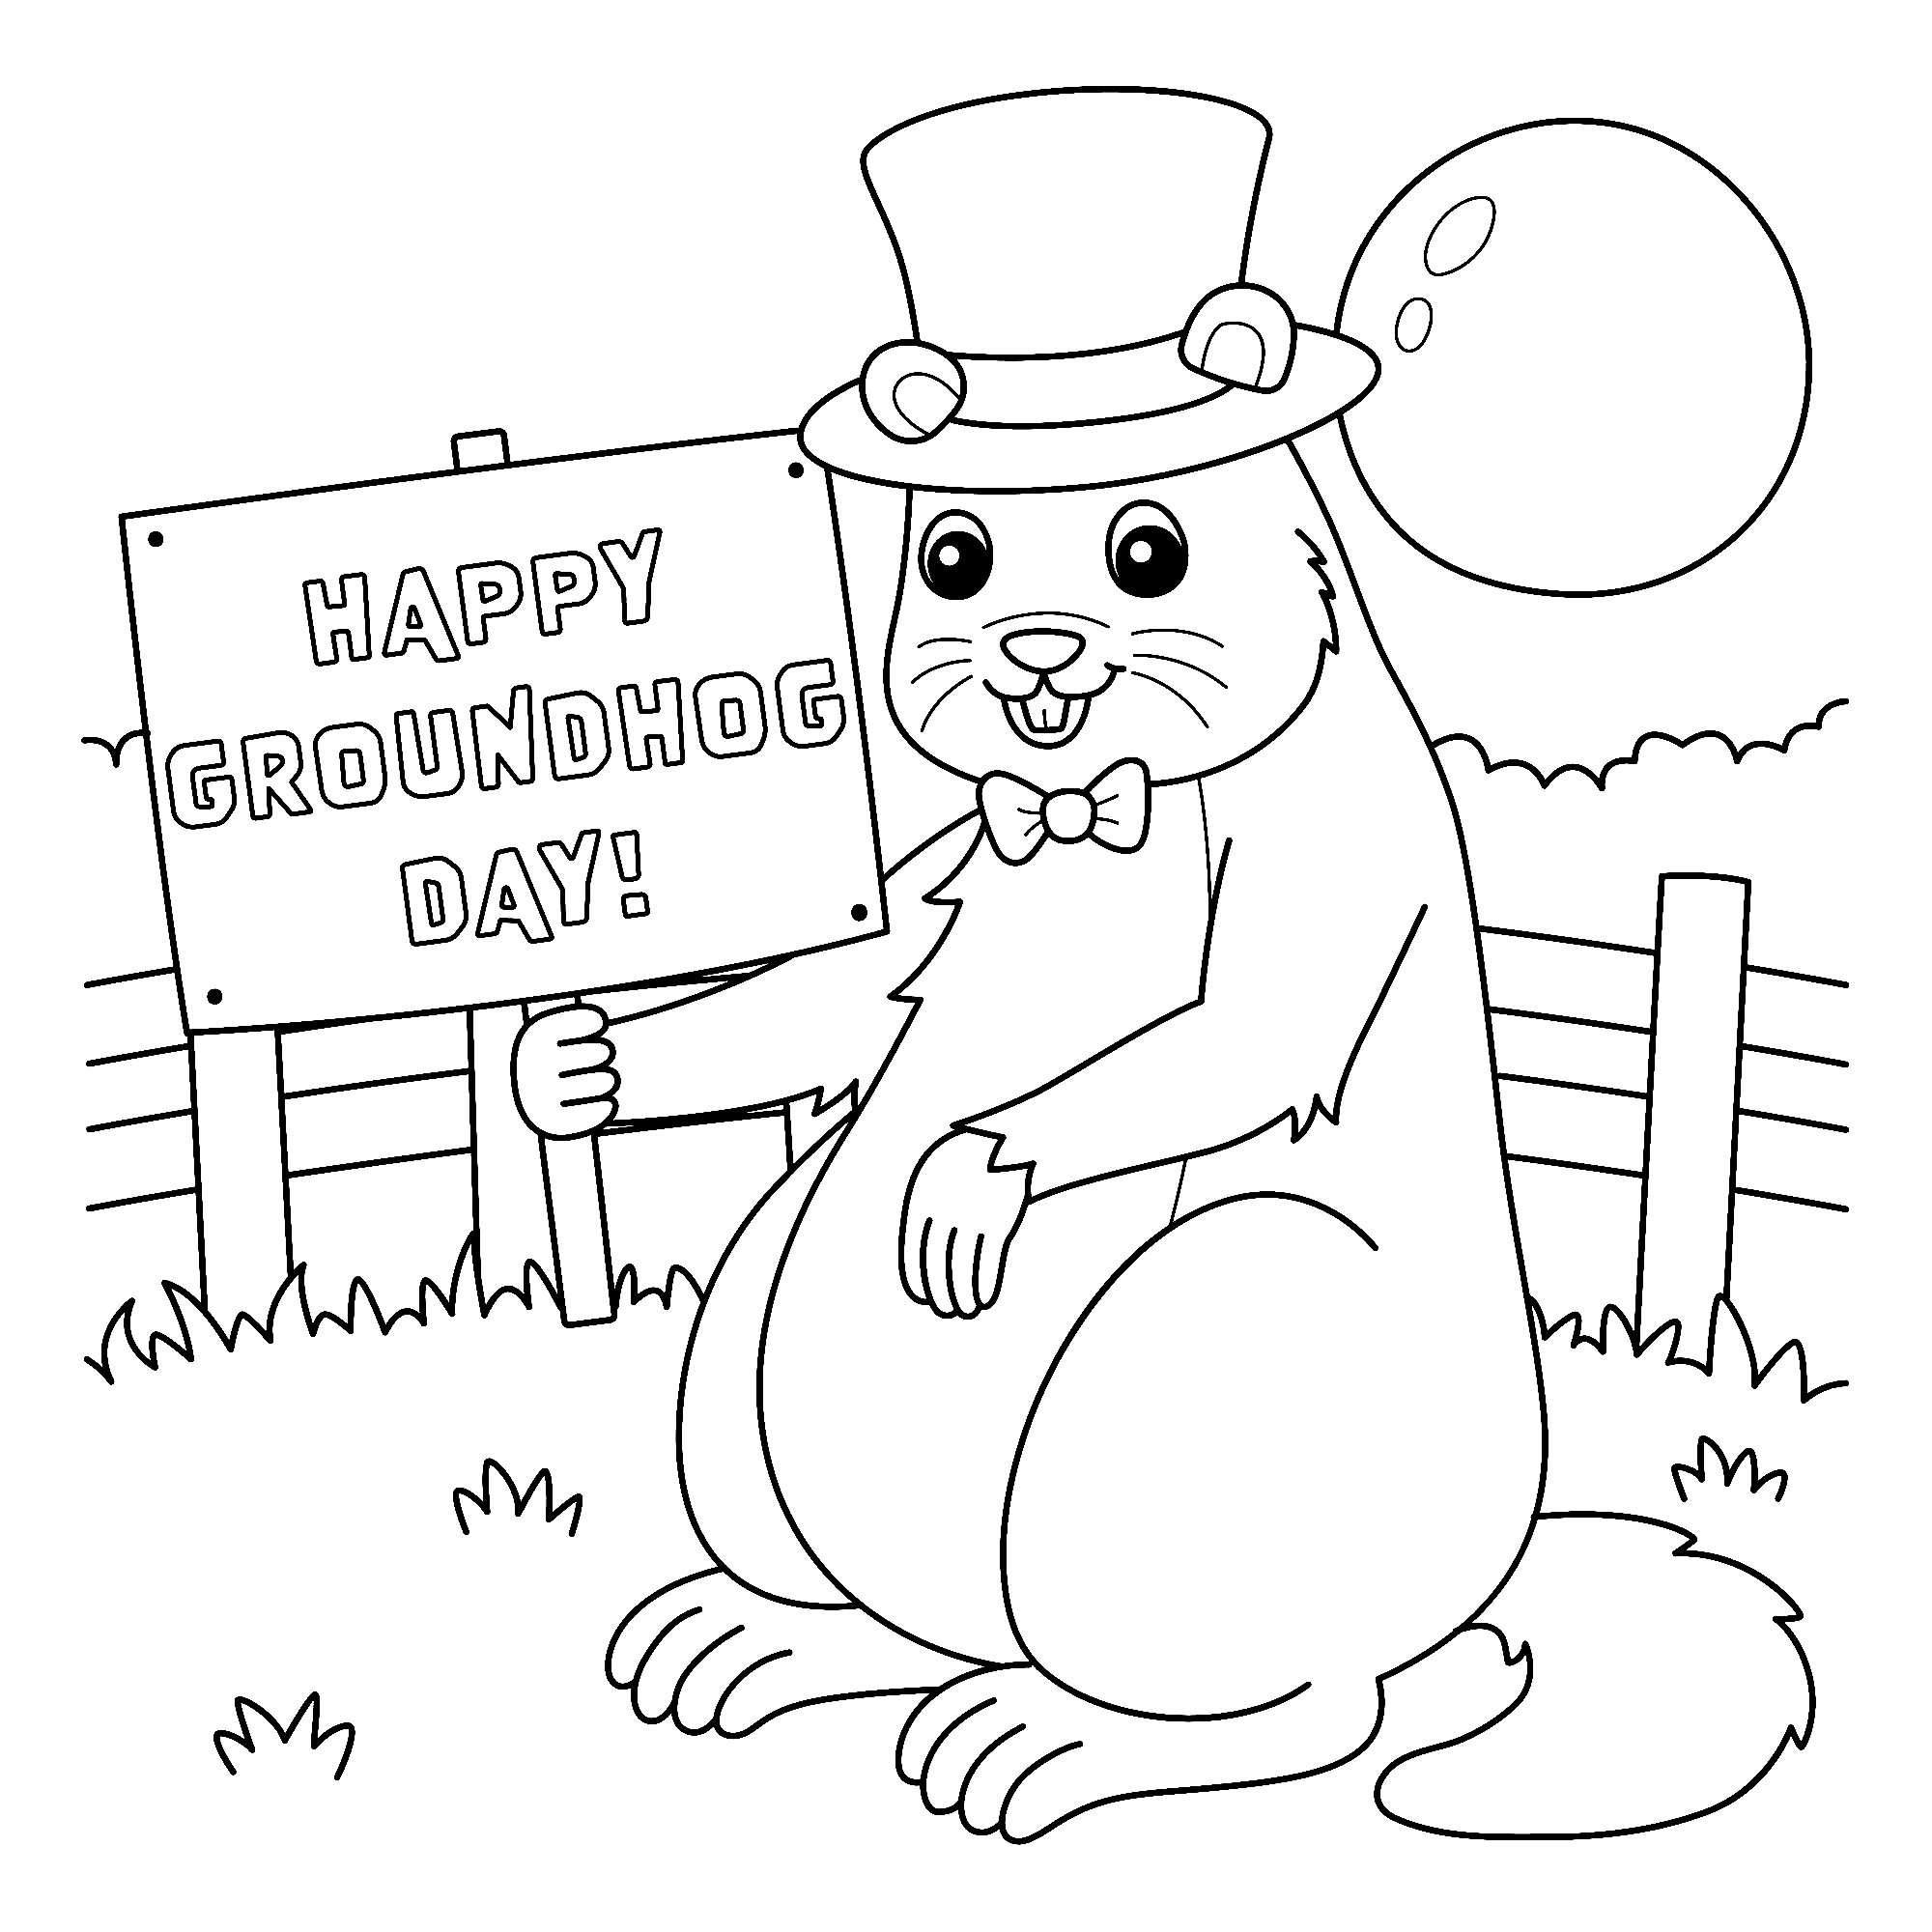 Happy Groundhog Day Image Coloring Pages